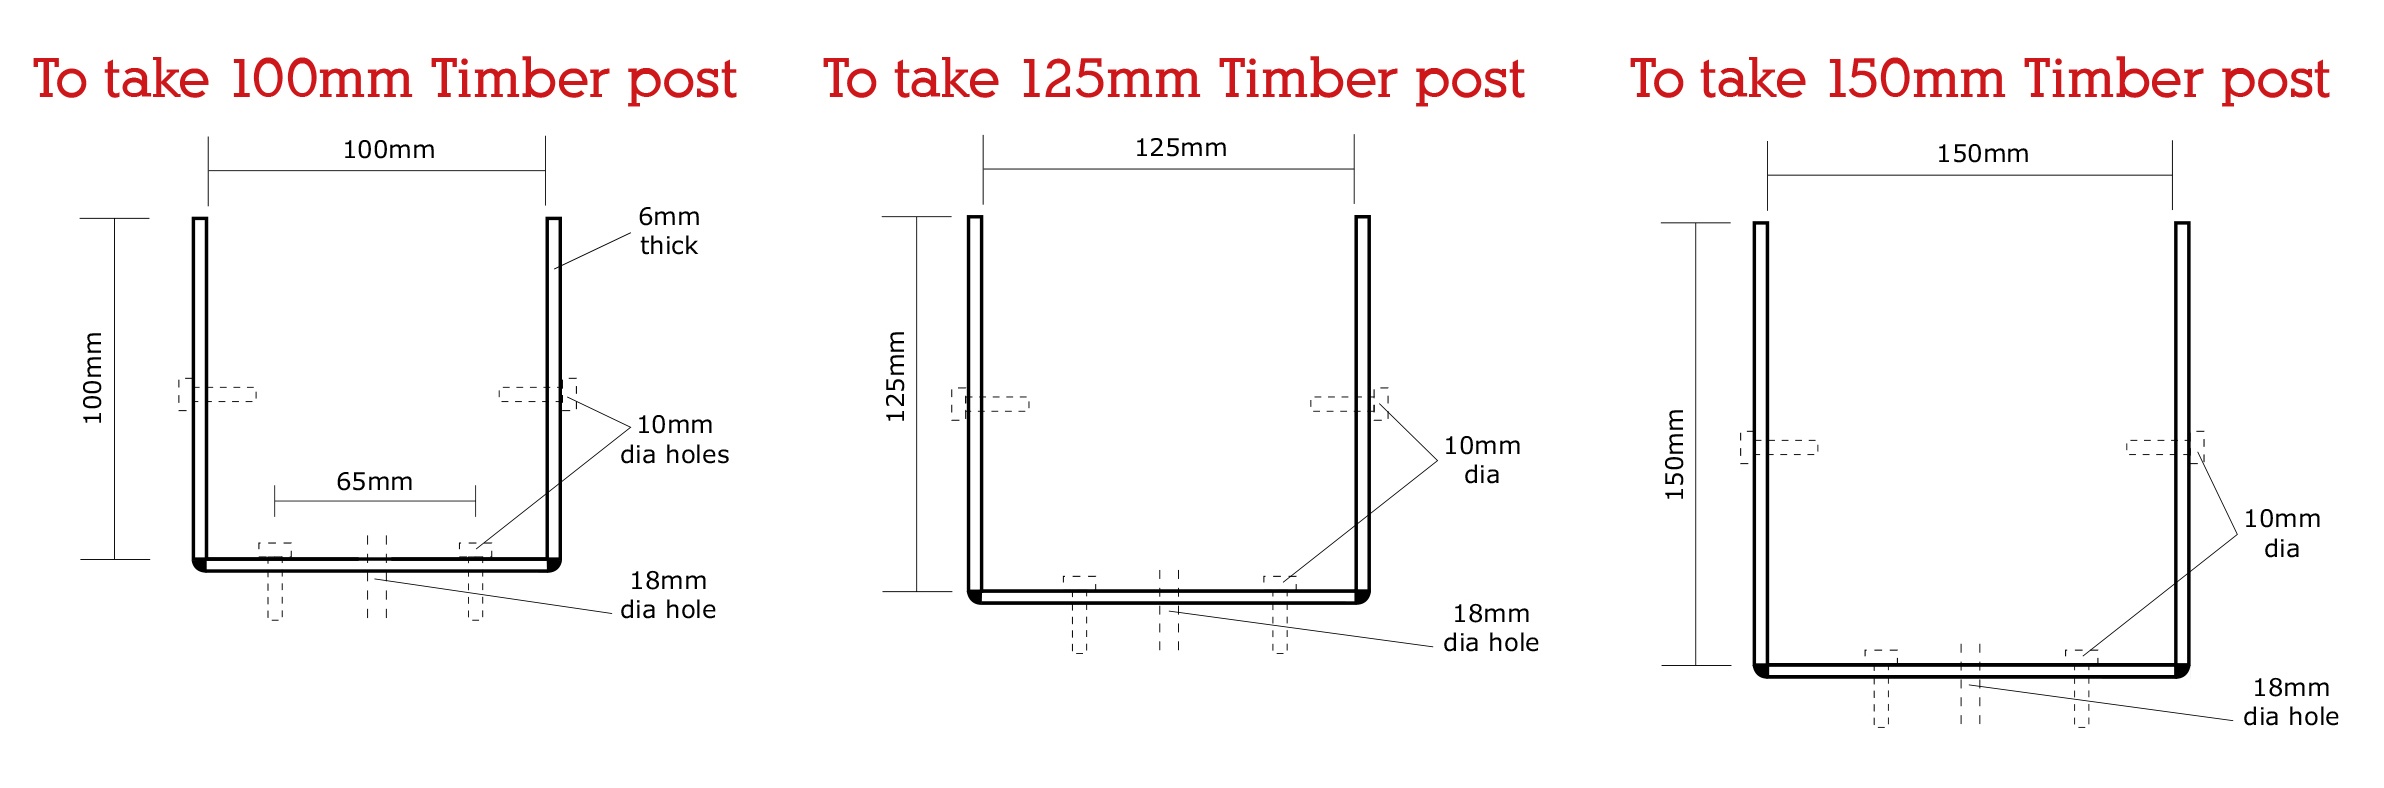 Timber Post Support S1 Diagram